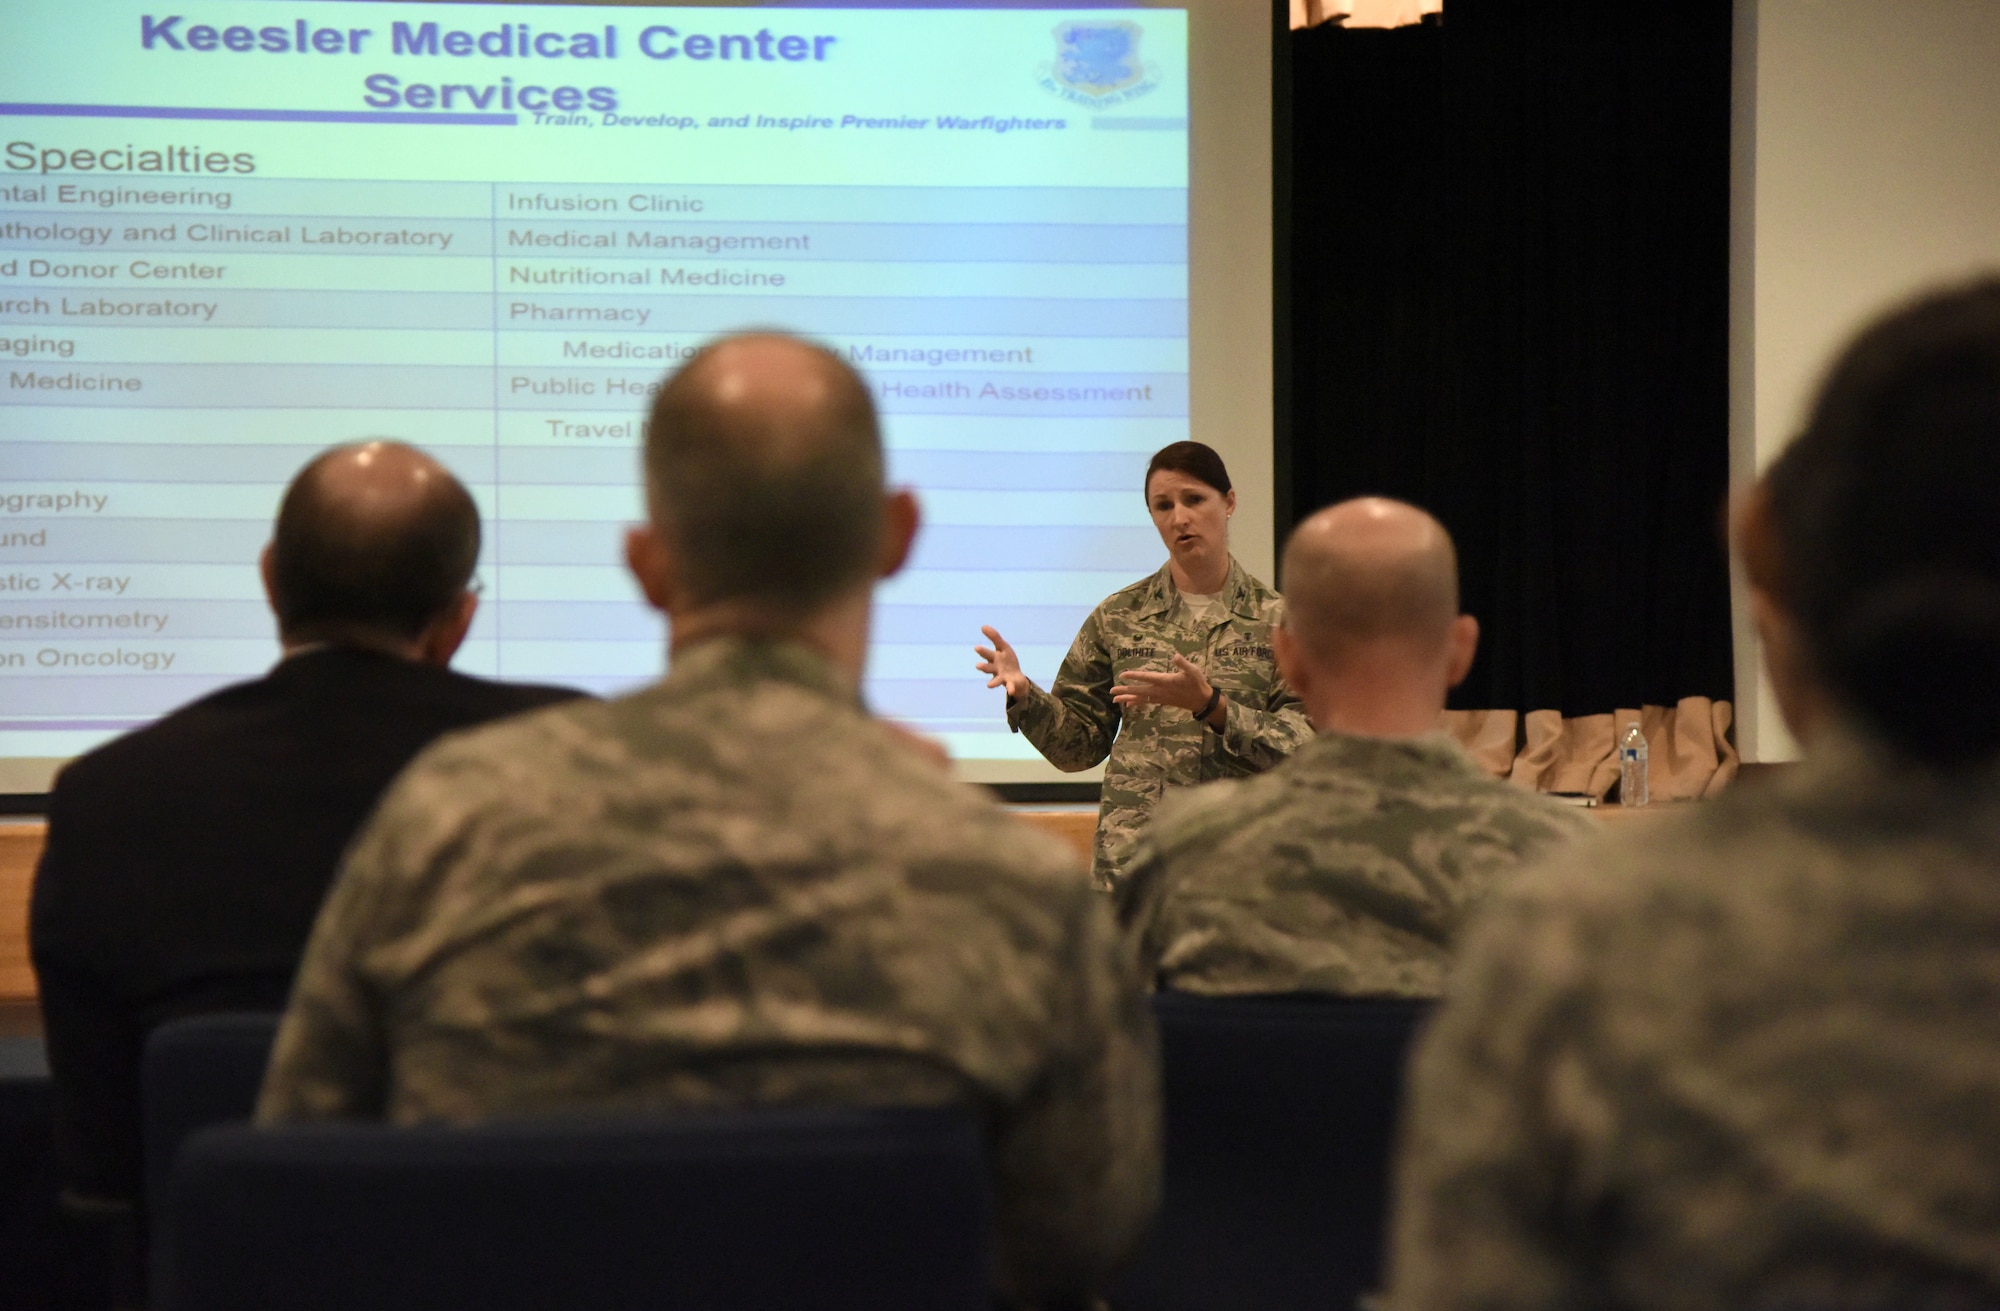 U.S. Air Force Col. Beatrice Dolihite, 81st Medical Group commander, delivers the 81st MDG mission brief to Gen. Stephen Wilson, Vice Chief of Staff of the Air Force; Matthew Donovan, Under Secretary of the Air Force; Lt. Gen. Dorothy Hogg, Air Force Surgeon General, and Keesler Leadership at the Keesler Medical Center auditorium at Keesler Air Force Base, Mississippi, Sept. 10, 2018. The purpose of the visit was to become more familiar with the 81st MDG's mission capabilities prior to Keesler Medical Center's transition to the Defense Health Agency. (U.S. Air Force photo by Kemberly Groue)